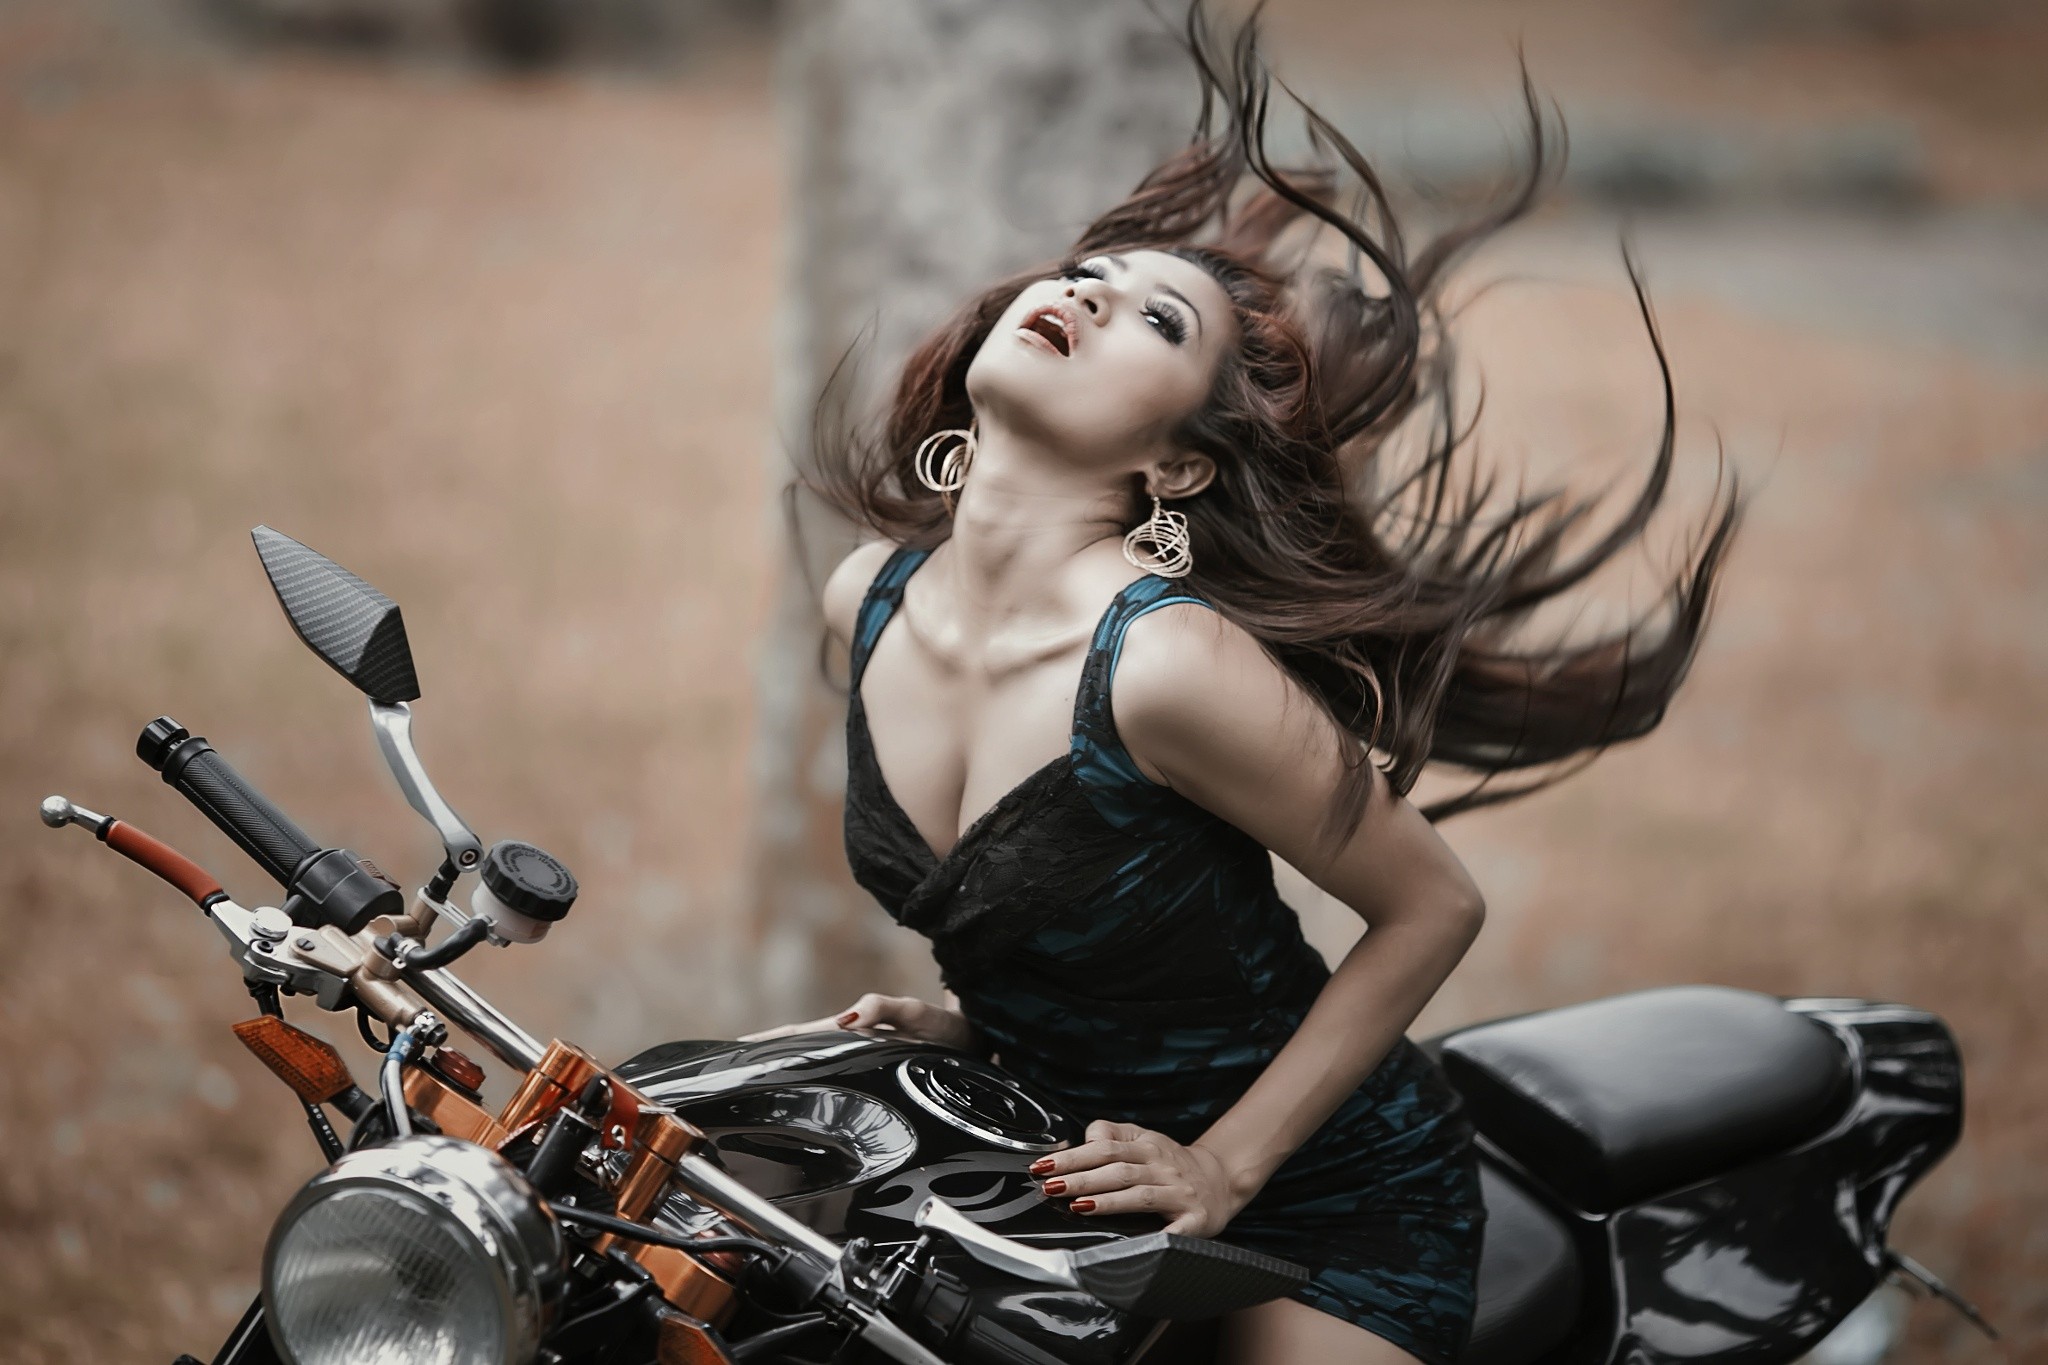 People 2048x1365 women model brunette cleavage smoky eyes red nails Ivan Lee motorcycle women with motorcycles vehicle open mouth long hair minidress women outdoors outdoors dress Asian black motorcycles